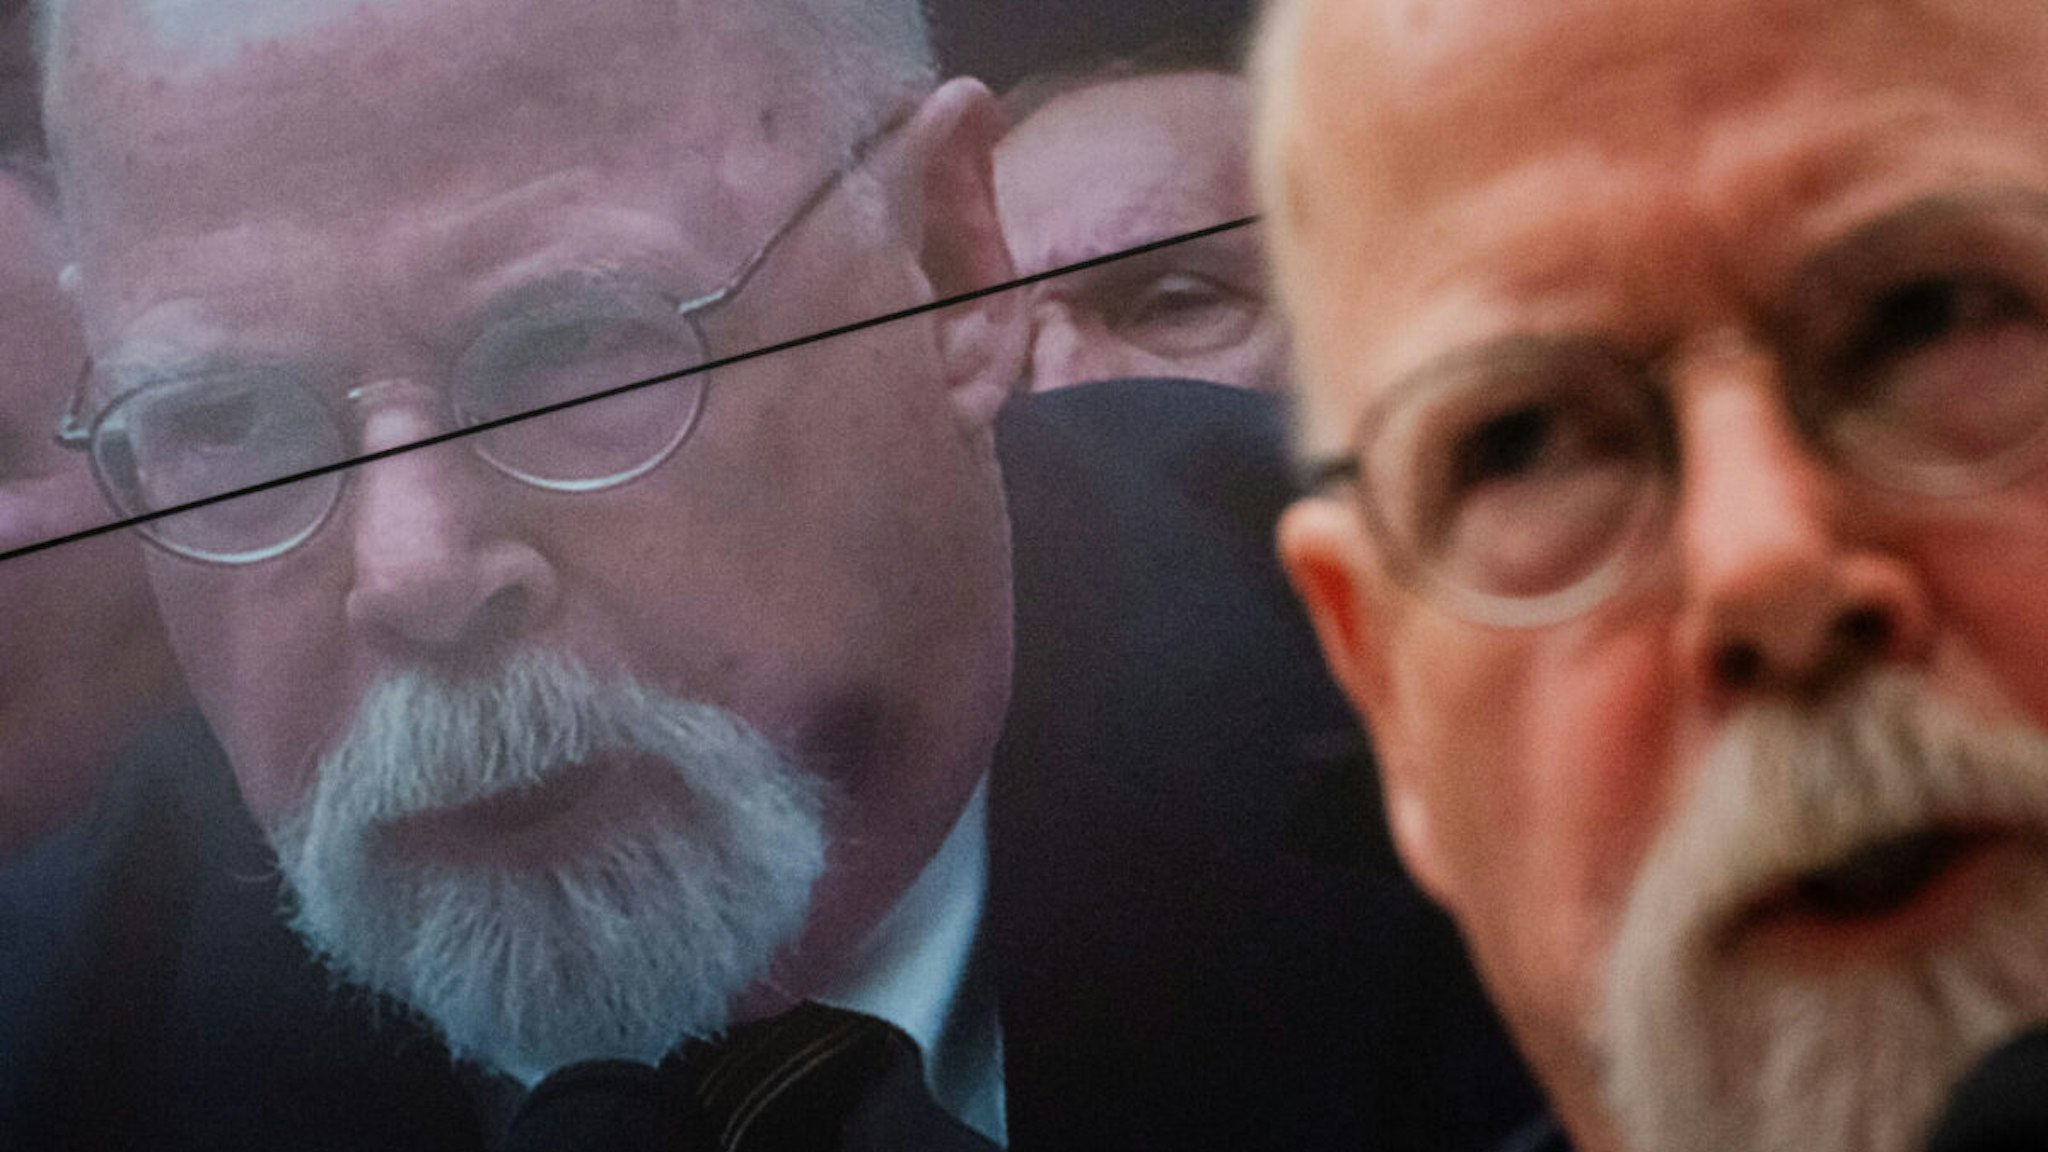 Former Justice Department Special Counsel John Durham testifies before the House Judiciary Committee at the Rayburn House Office Building on Wednesday, June 21, 2023 in Washington, DC.